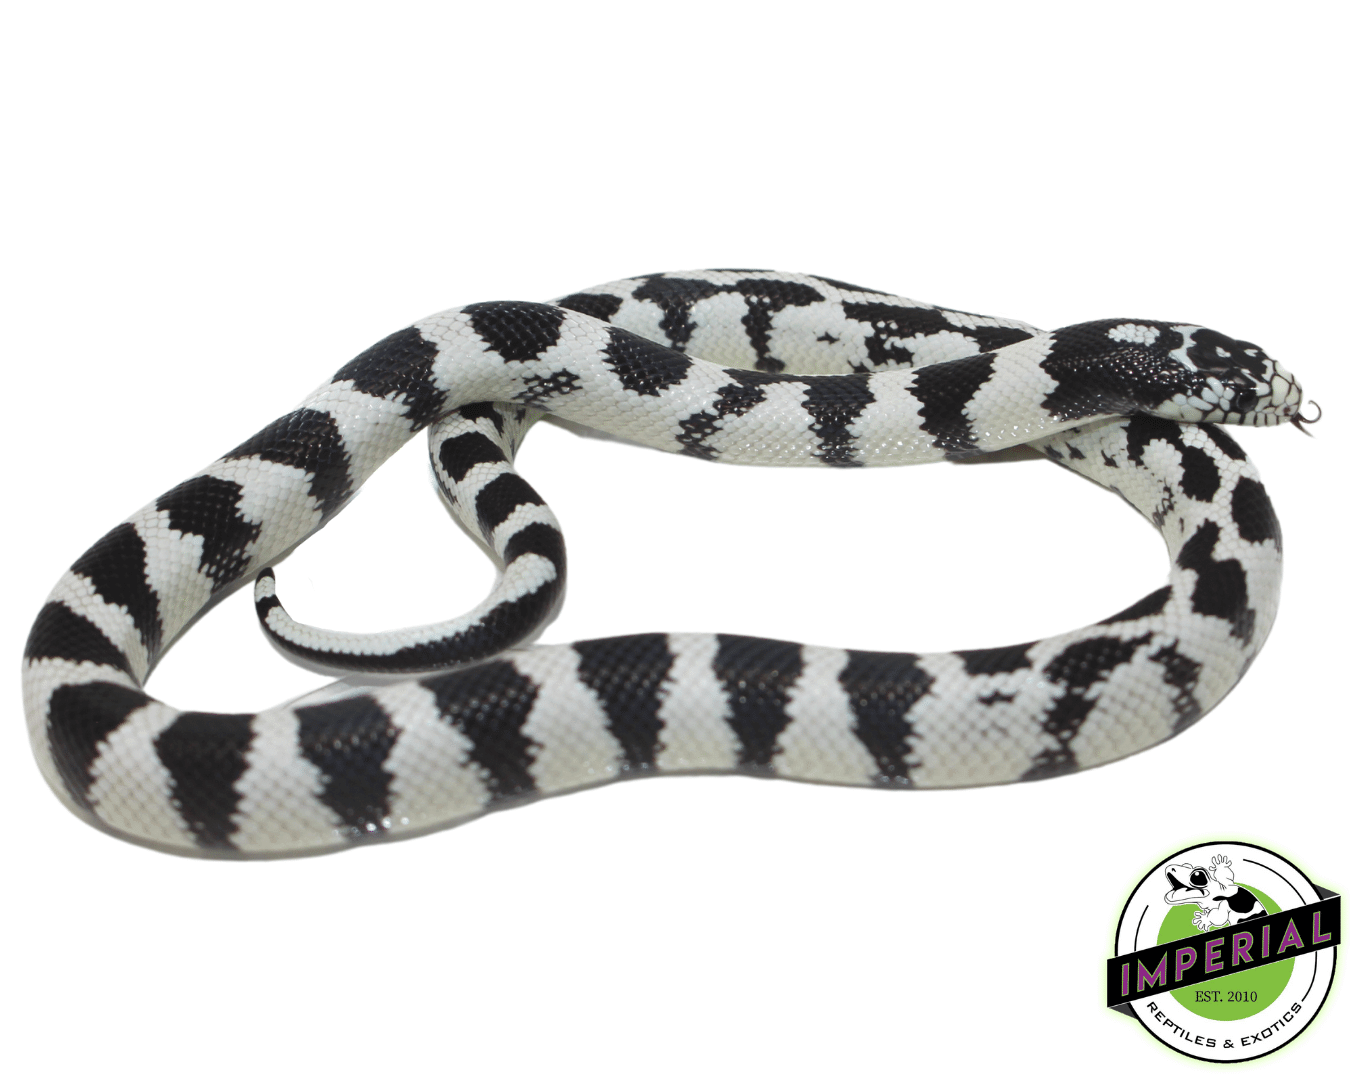 50/50 Banded cal king for sale, buy reptiles online at cheap prices